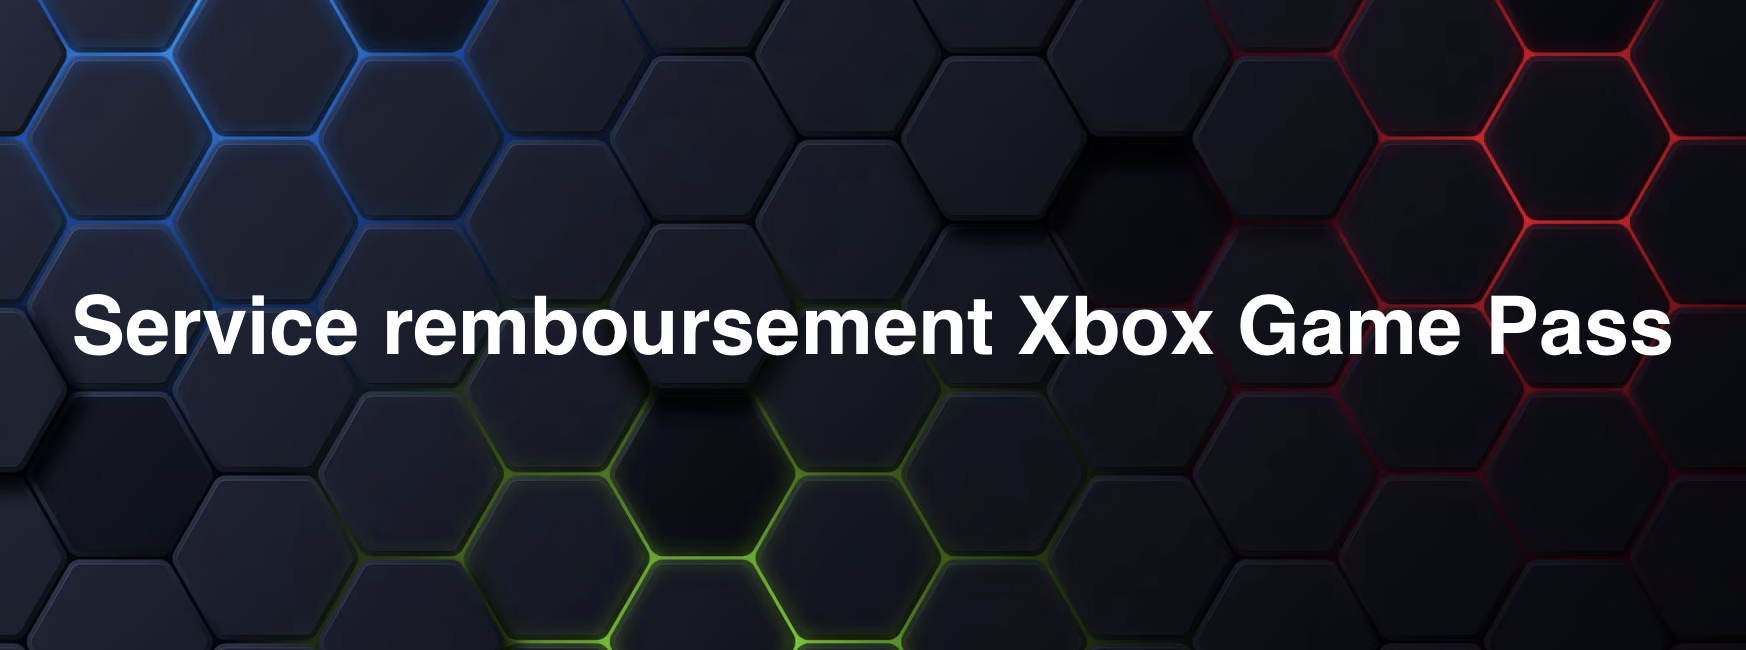 service remboursement Xbox Game Pass 